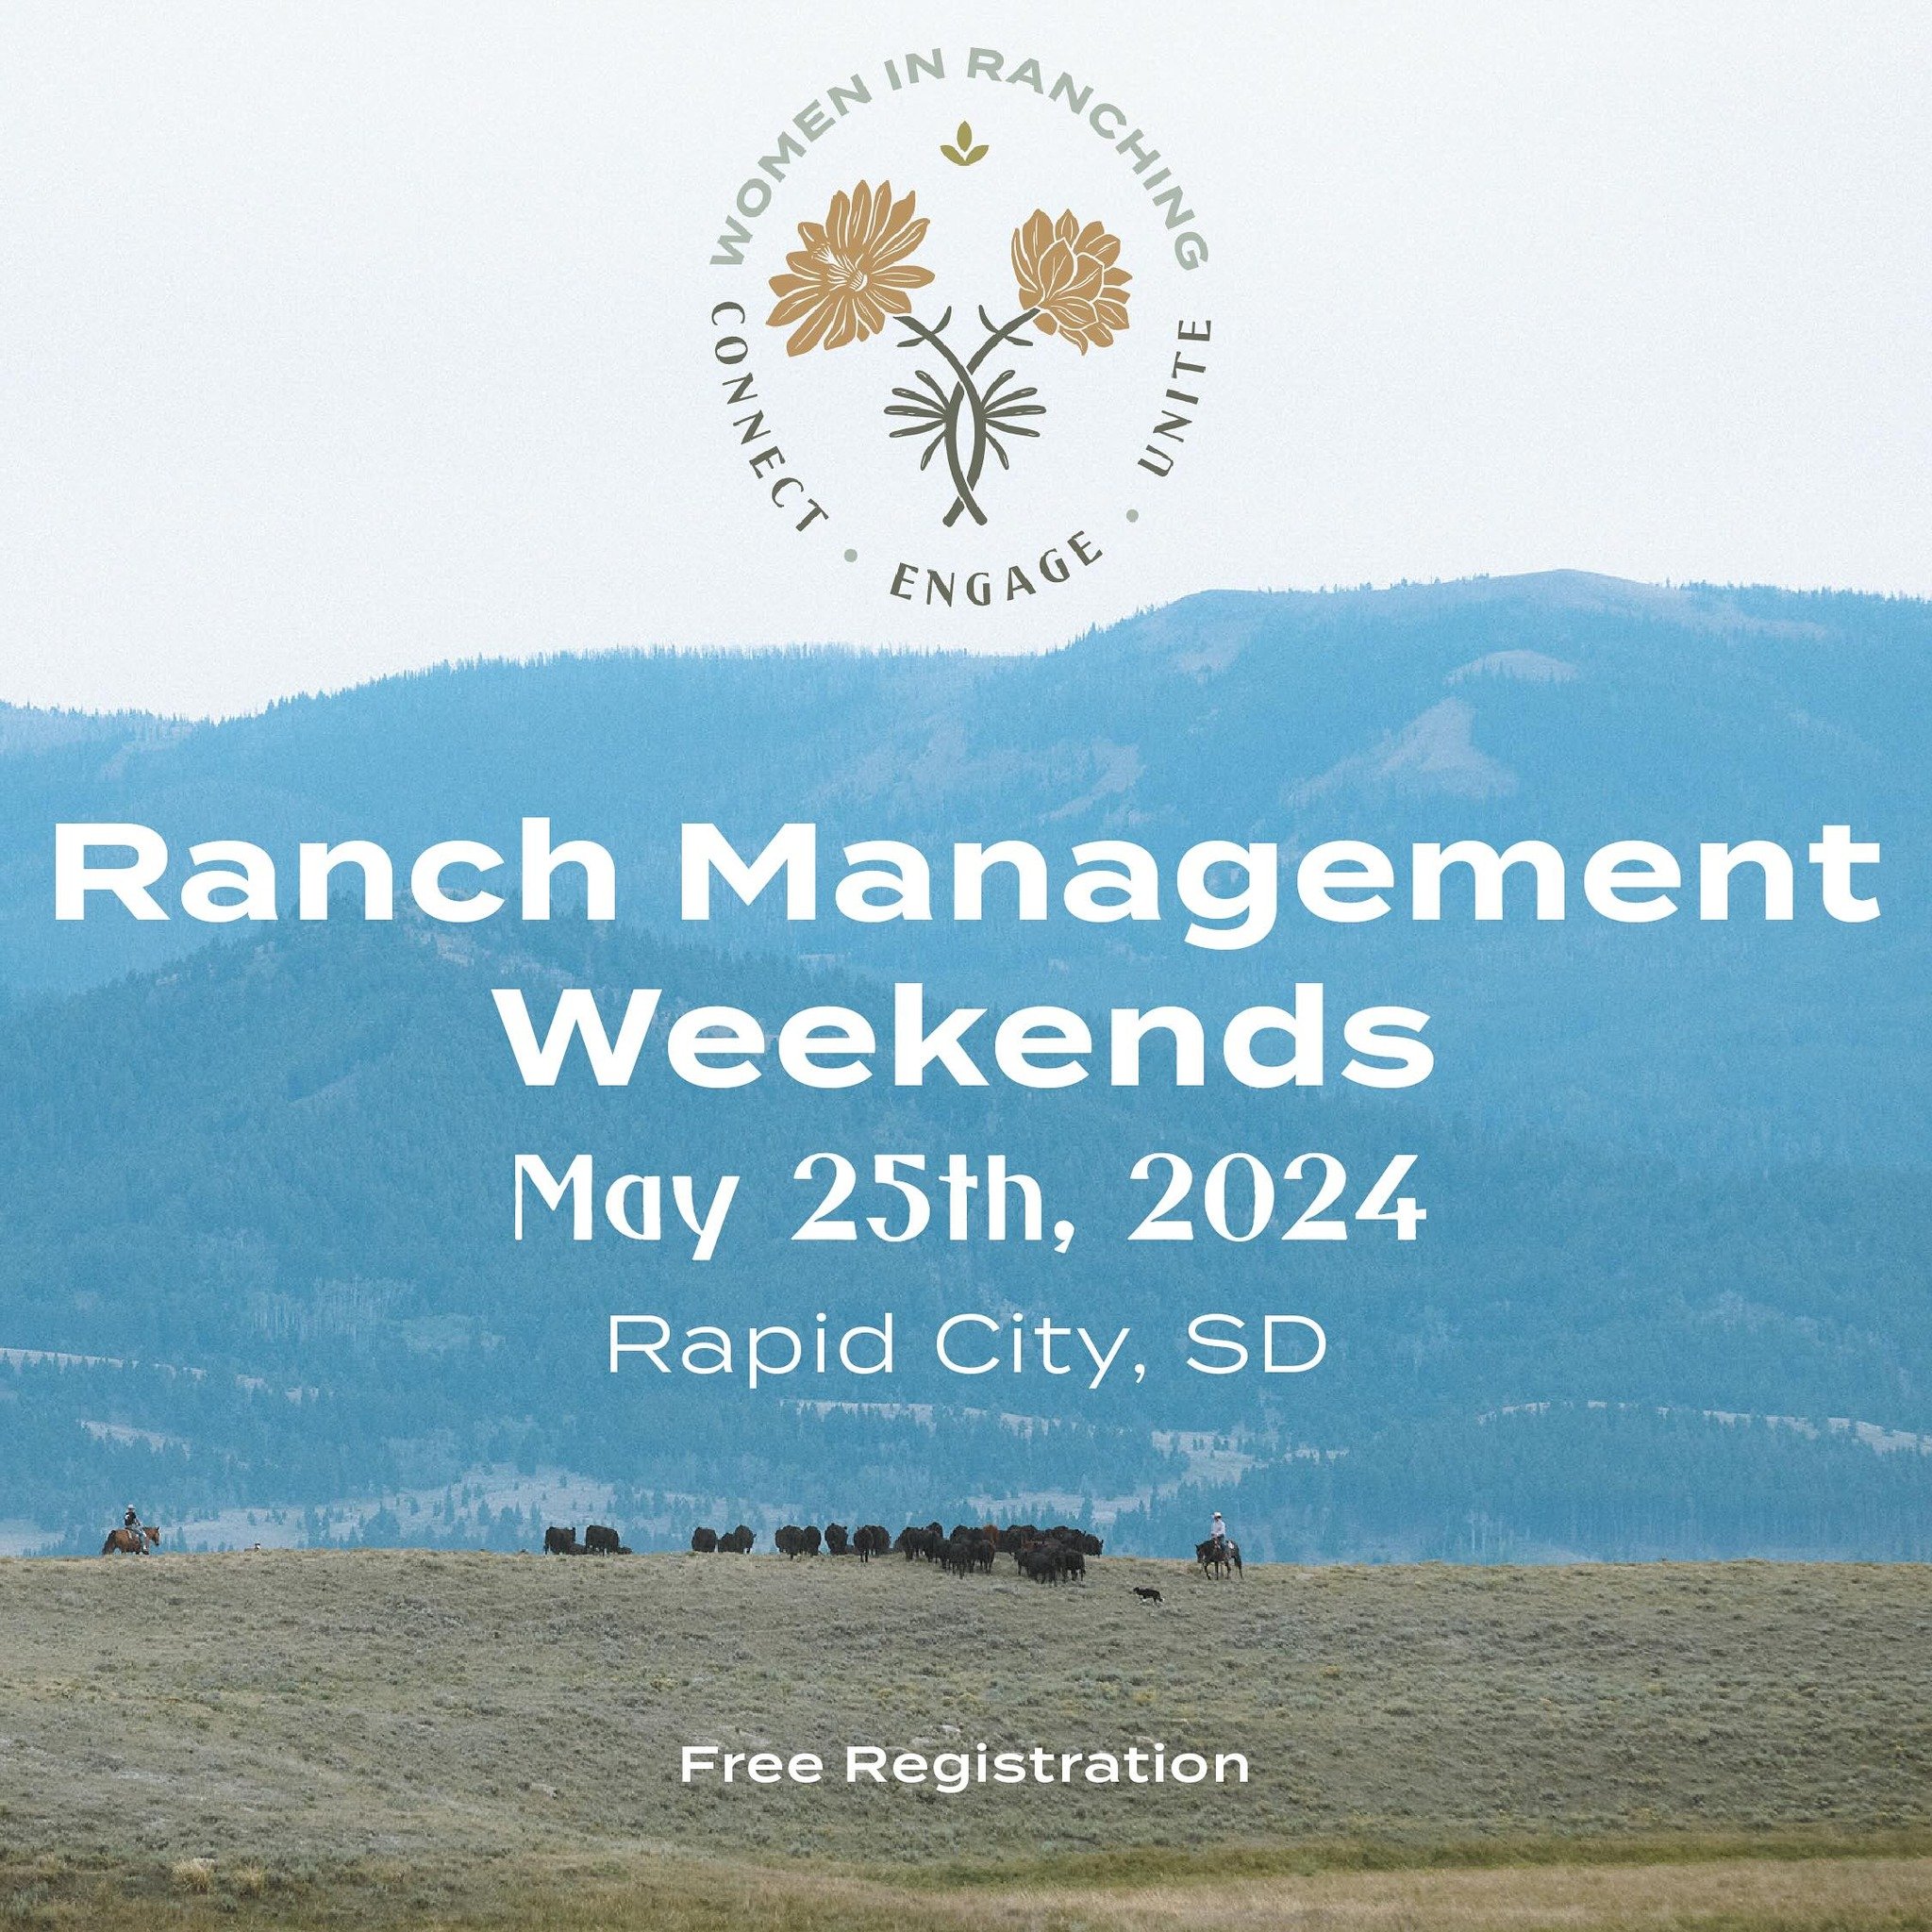 🌟Exciting news! 🌟Thanks to the generous support from the Plank Stewardship Initiative, our first ranch management session at the @777bison ranch in Rapid City SD is now happening at absolutely no cost! We&rsquo;re thrilled to be able to offer this 